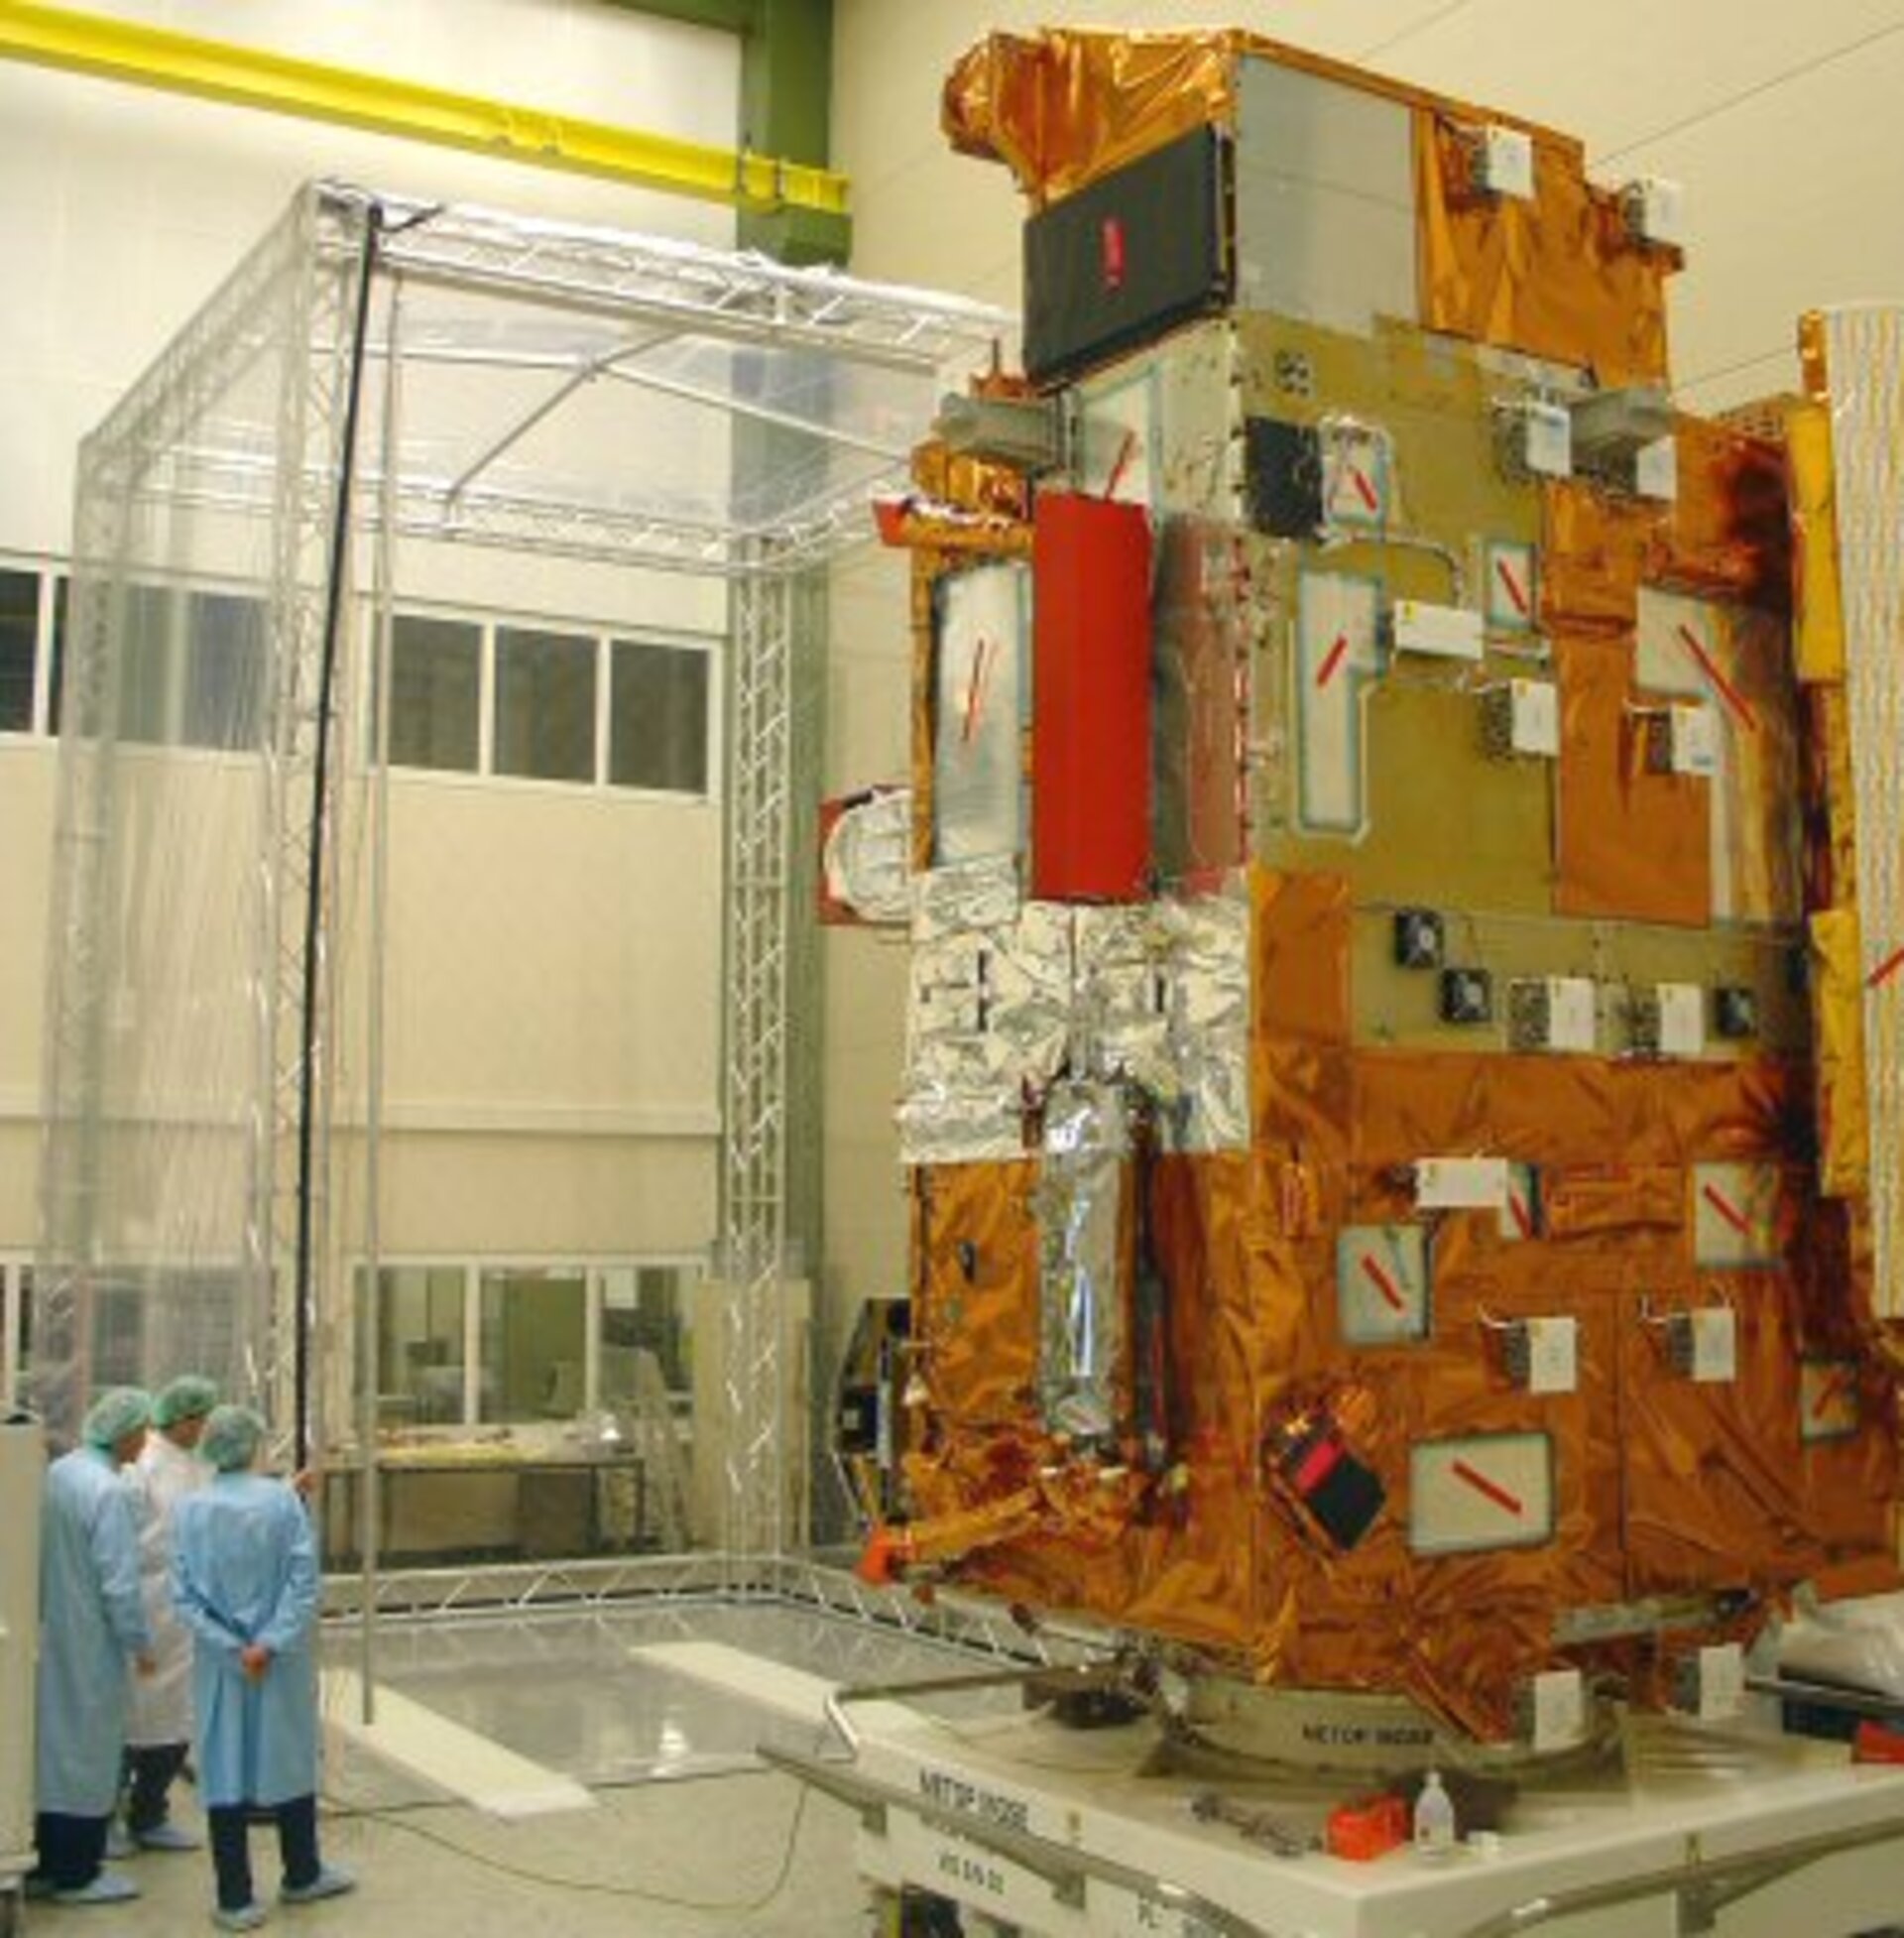 MetOp-1 payload module in front of long-term storage